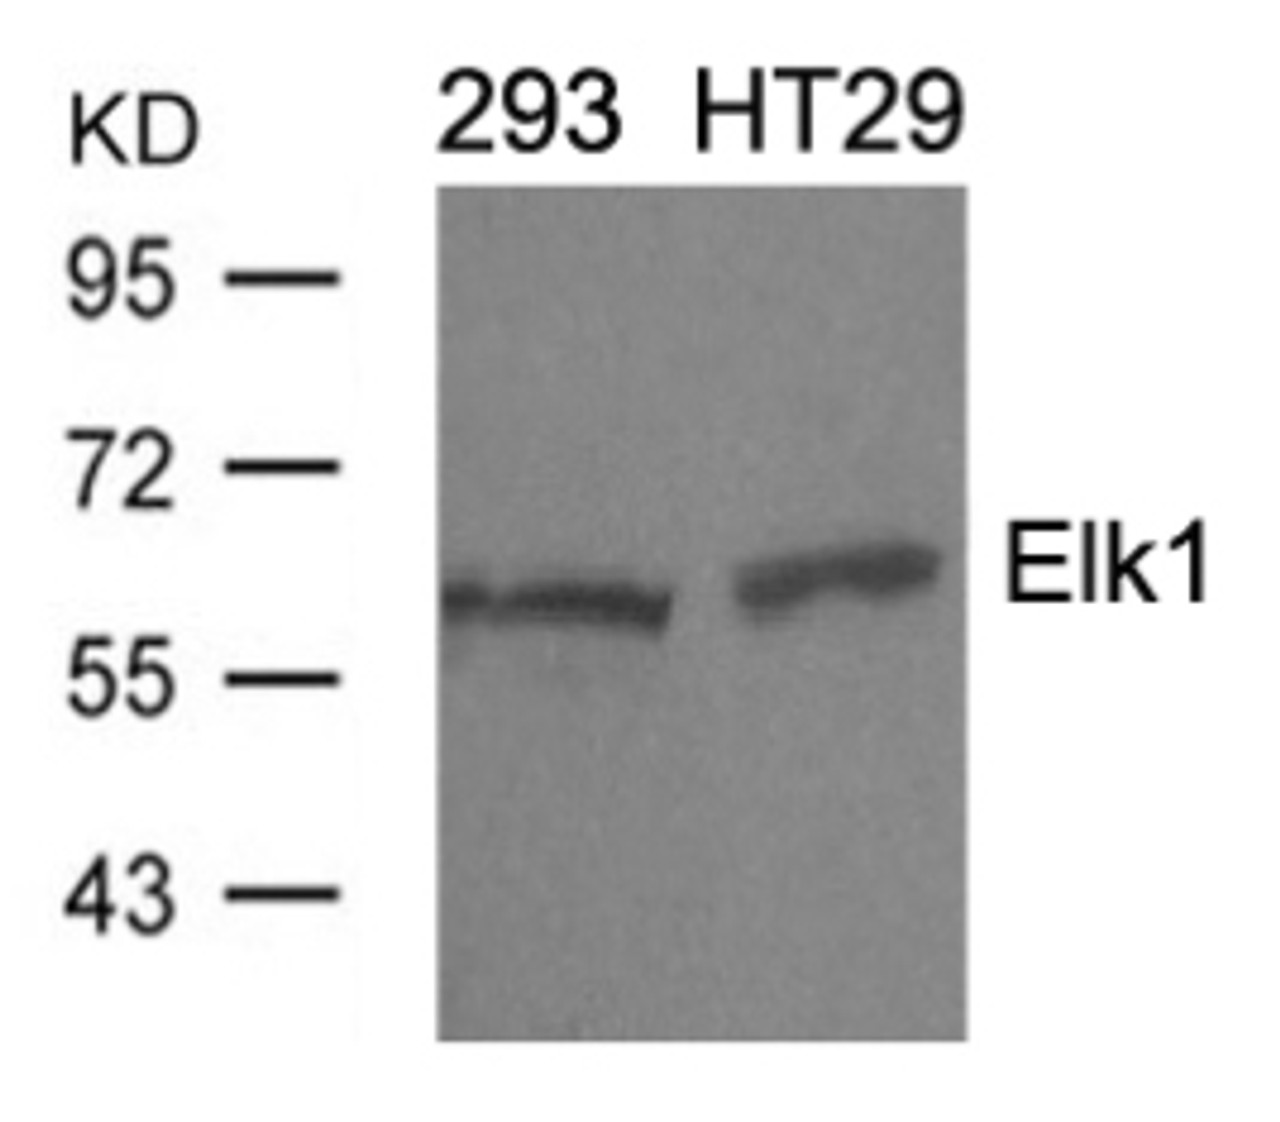 Western blot analysis of lysed extracts from 293 and HT29 cells using Elk1 (Ab-389) .